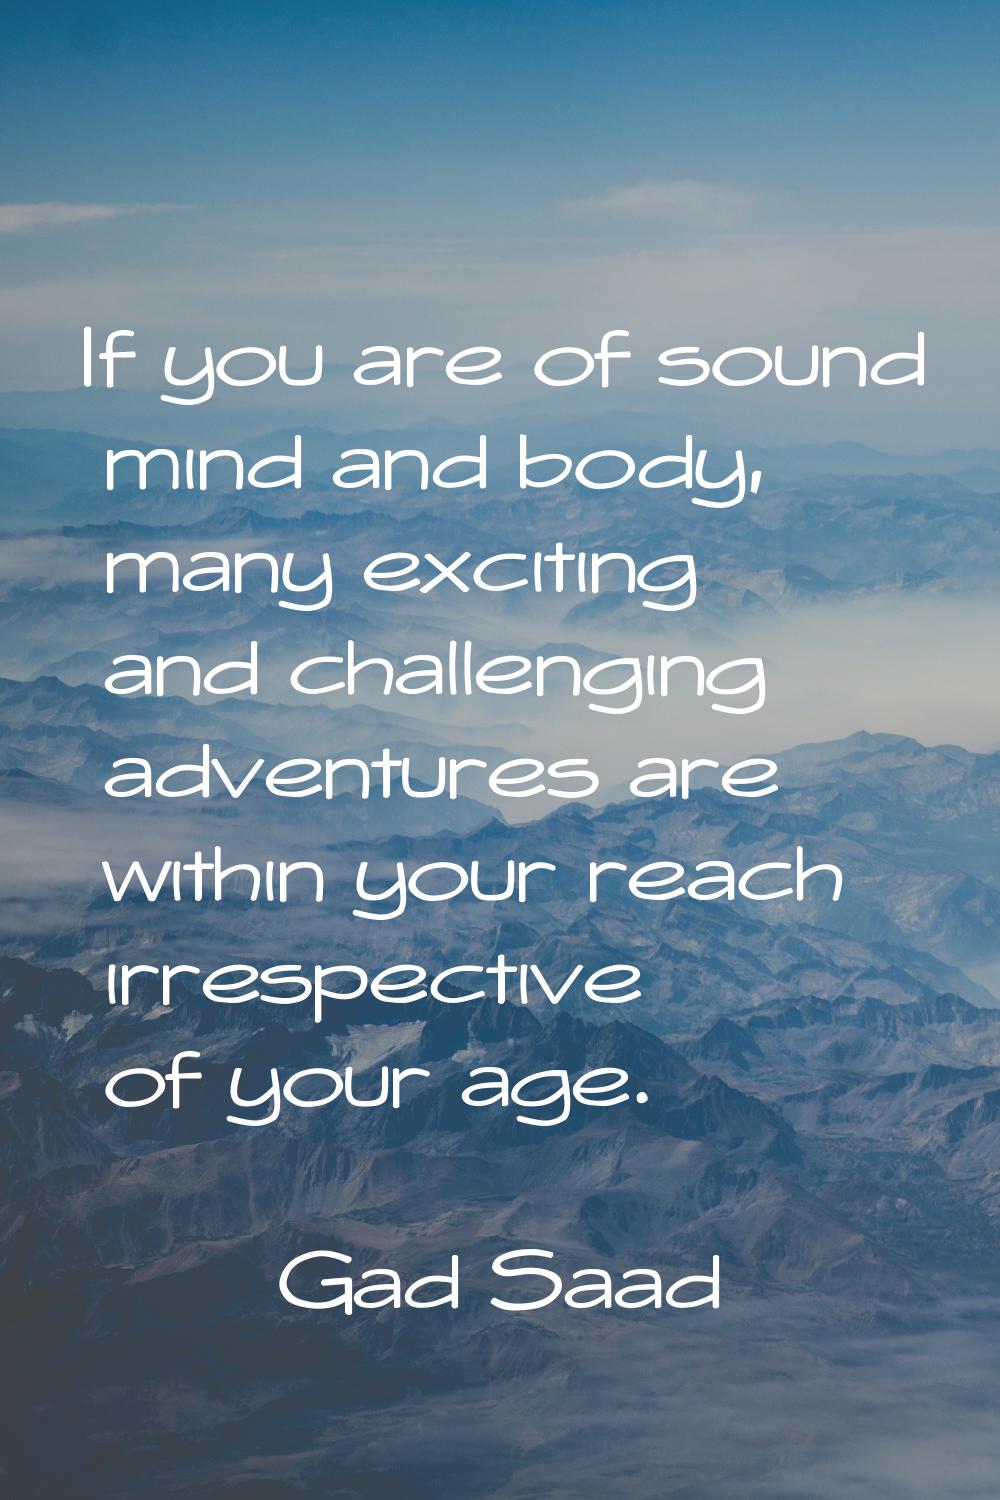 If you are of sound mind and body, many exciting and challenging adventures are within your reach i